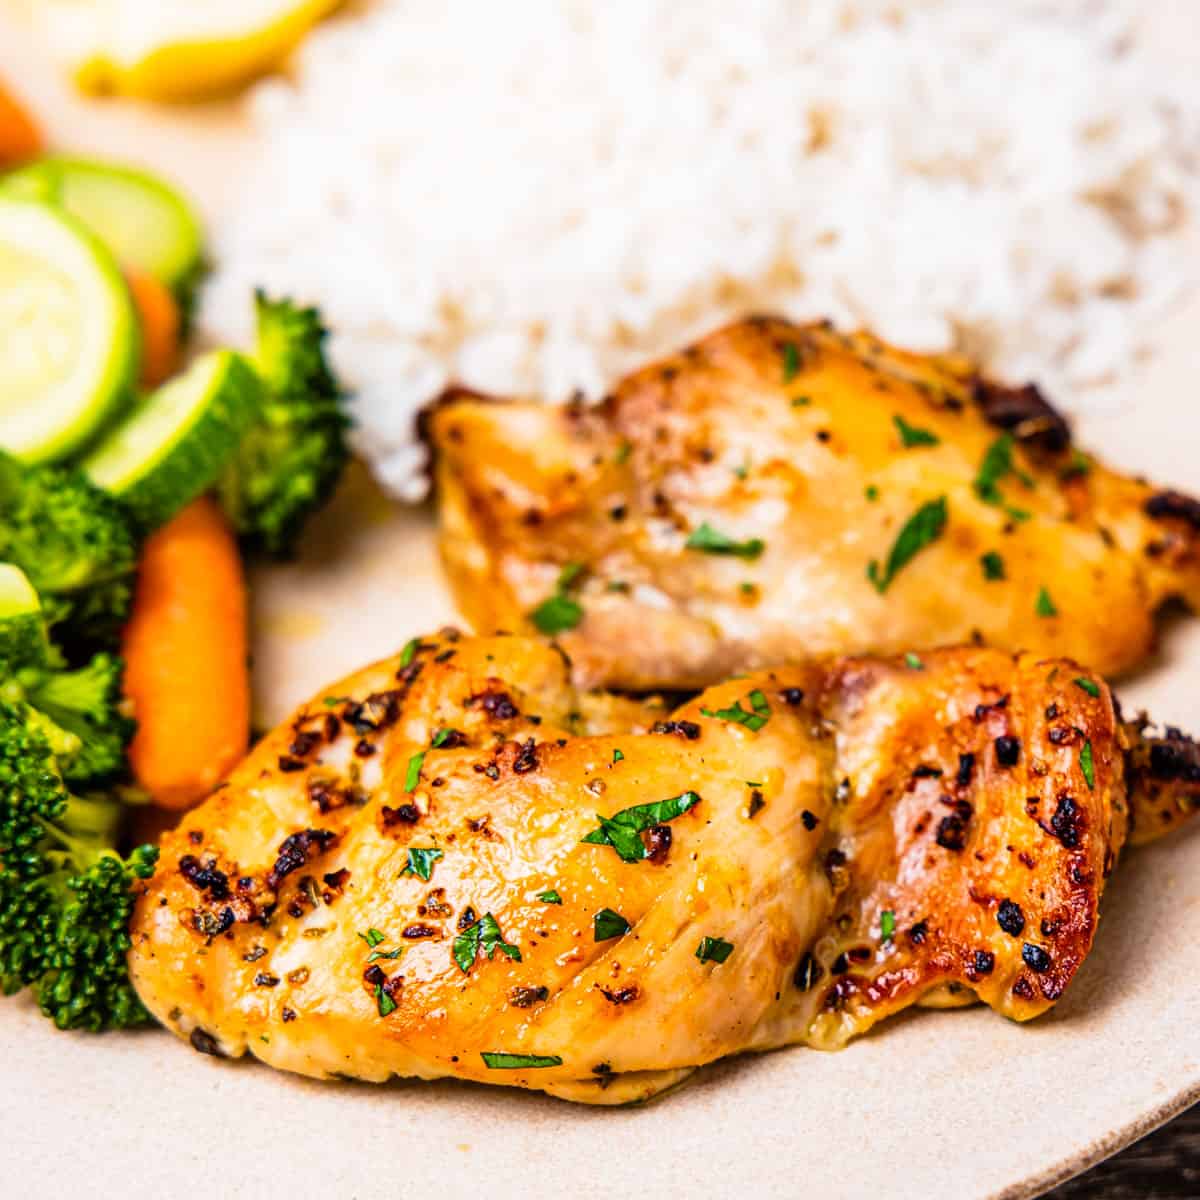 Close-up of two boneless skinless chicken thighs served on a plate with steamed vegetables and rice.